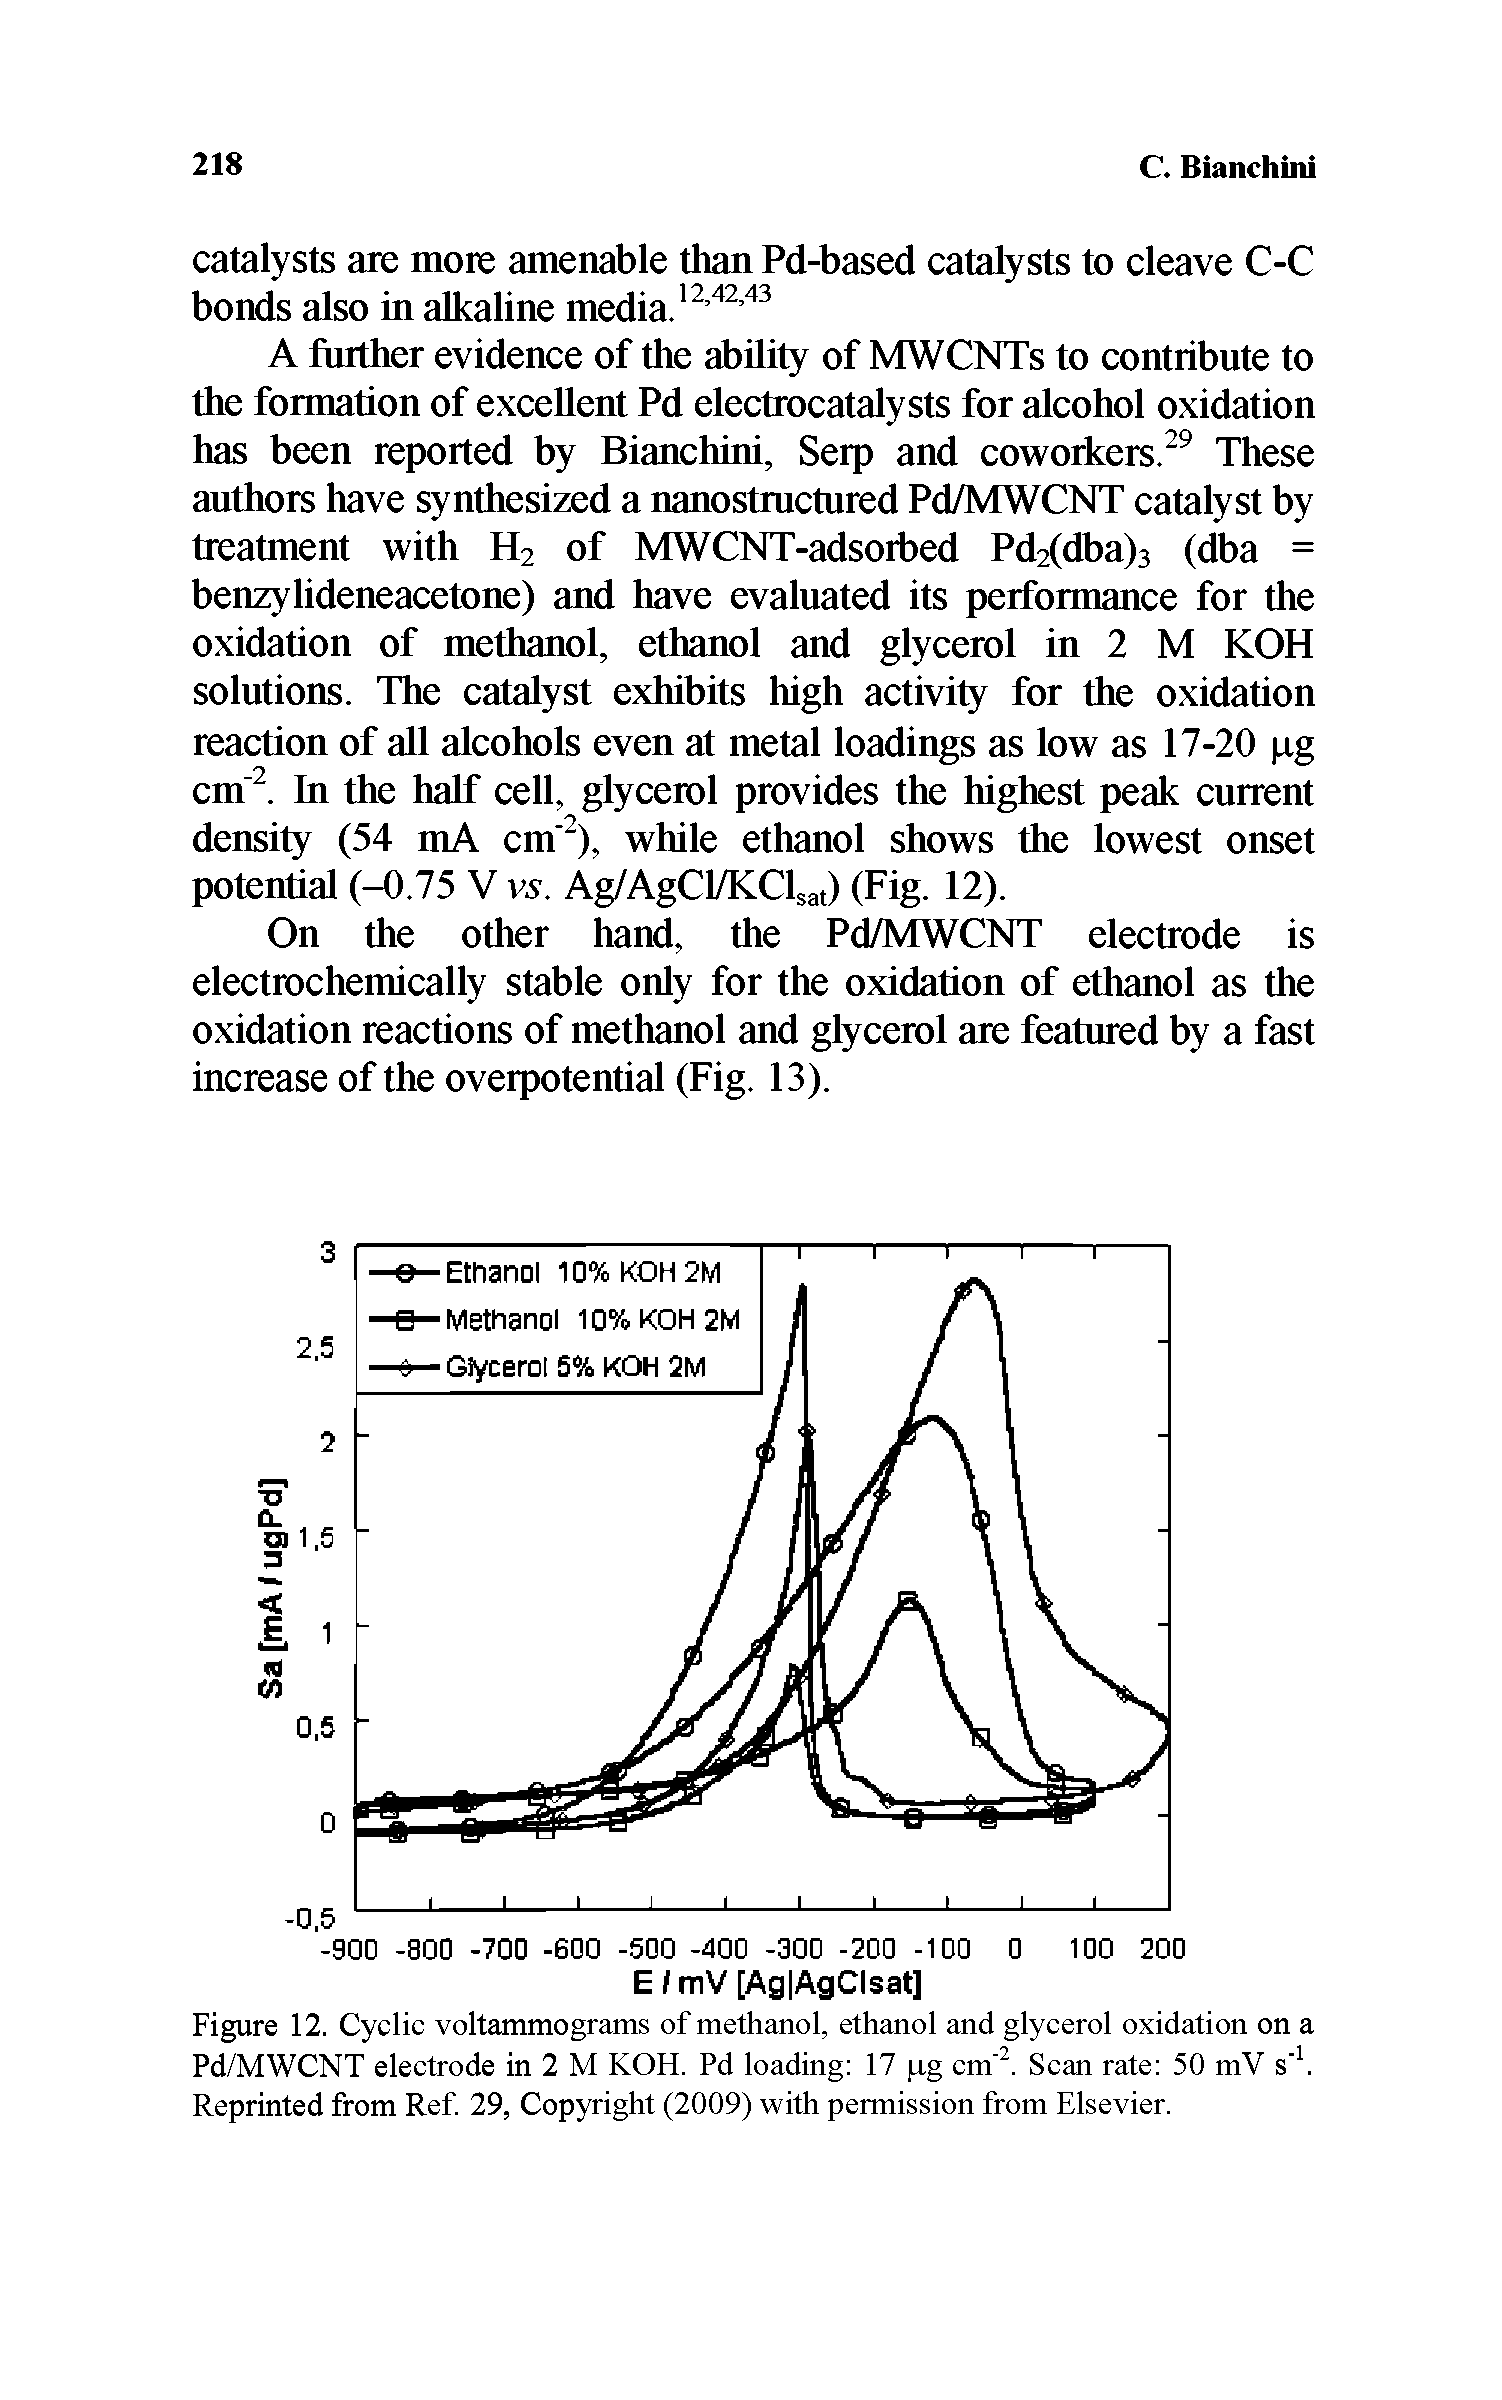 Figure 12. Cyclic voltammograms of methanol, ethanol and glycerol oxidation on a Pd/MWCNT electrode in 2 M KOH. Pd loading 17 tg cm. Scan rate 50 mV s". Reprinted from Ref. 29, Copyright (2009) with permission from Elsevier.